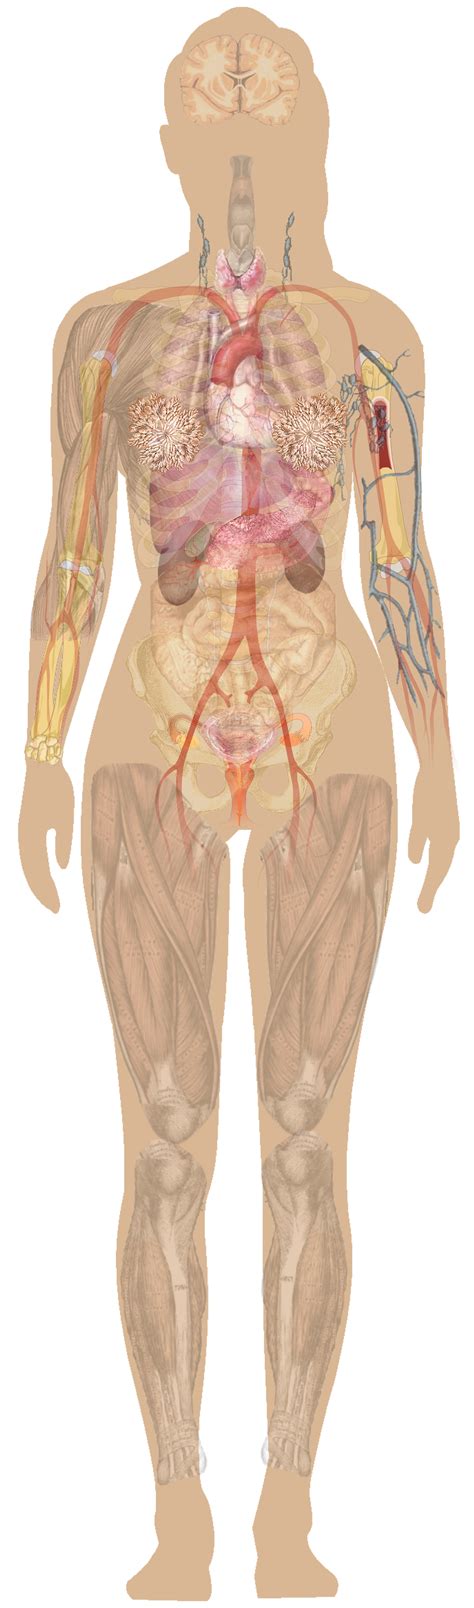 Female anatomy torso deals at alibaba.com that ensure you get maximum value for if you are. Some detail on human anatomy woman | Human anatomy female ...